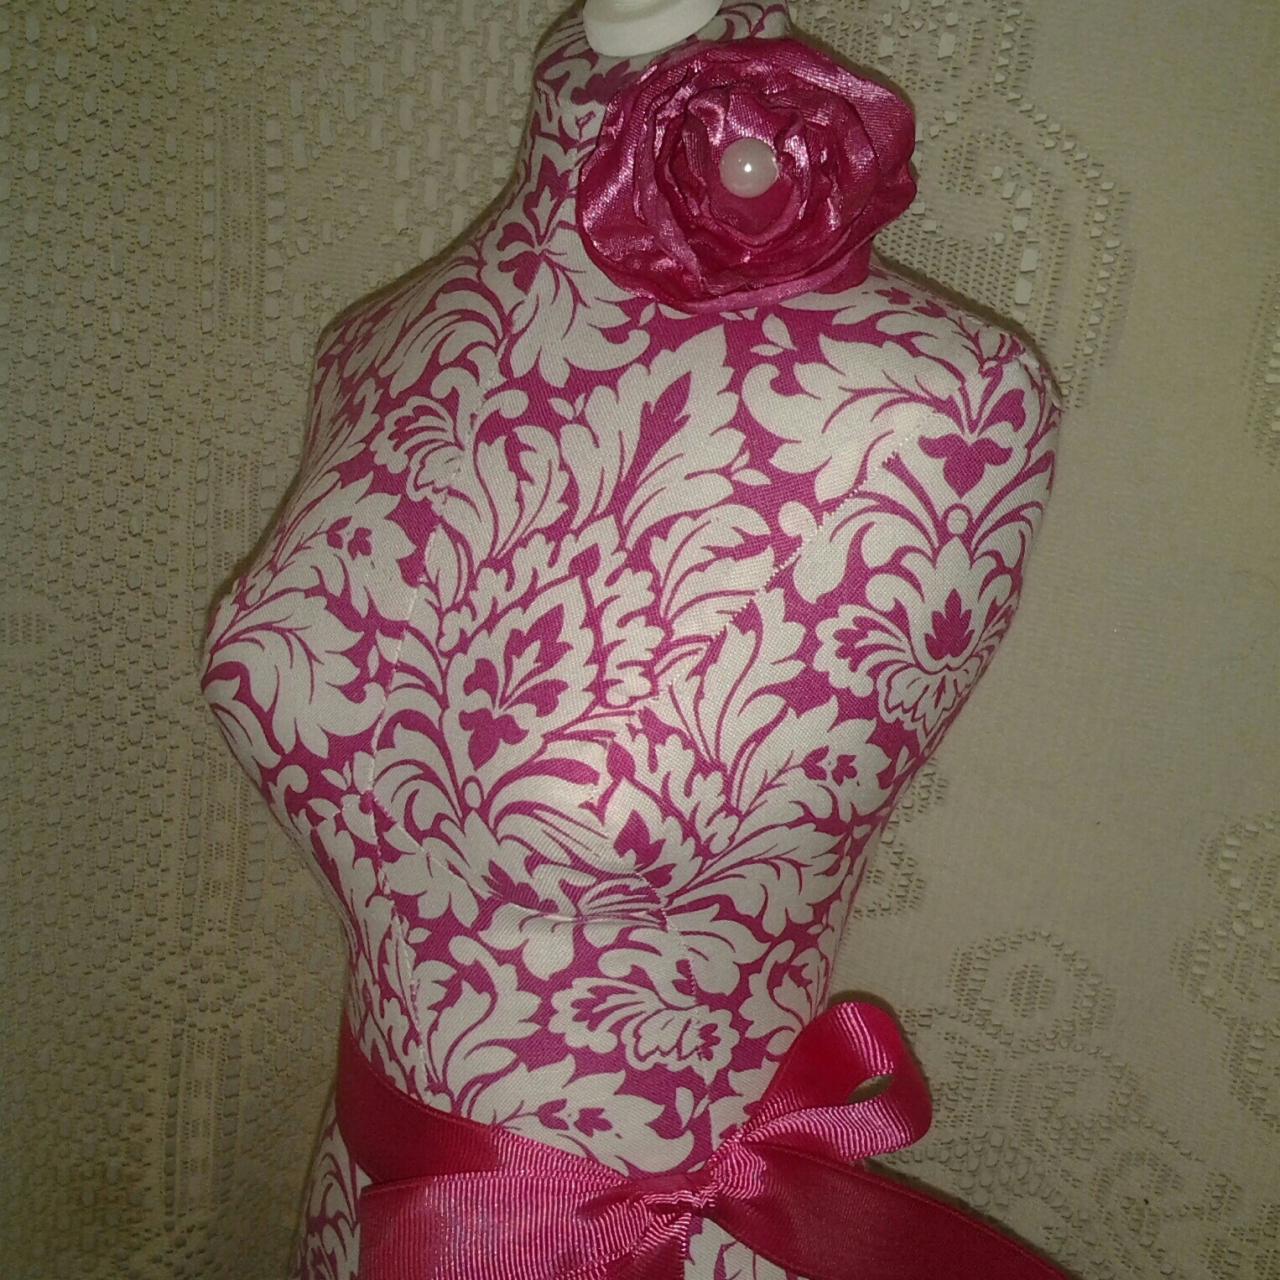 Paris Boutique Dress Form Designs Jewelry Display 34" Craft Market, Store Front Display Pink Damask Home Decor